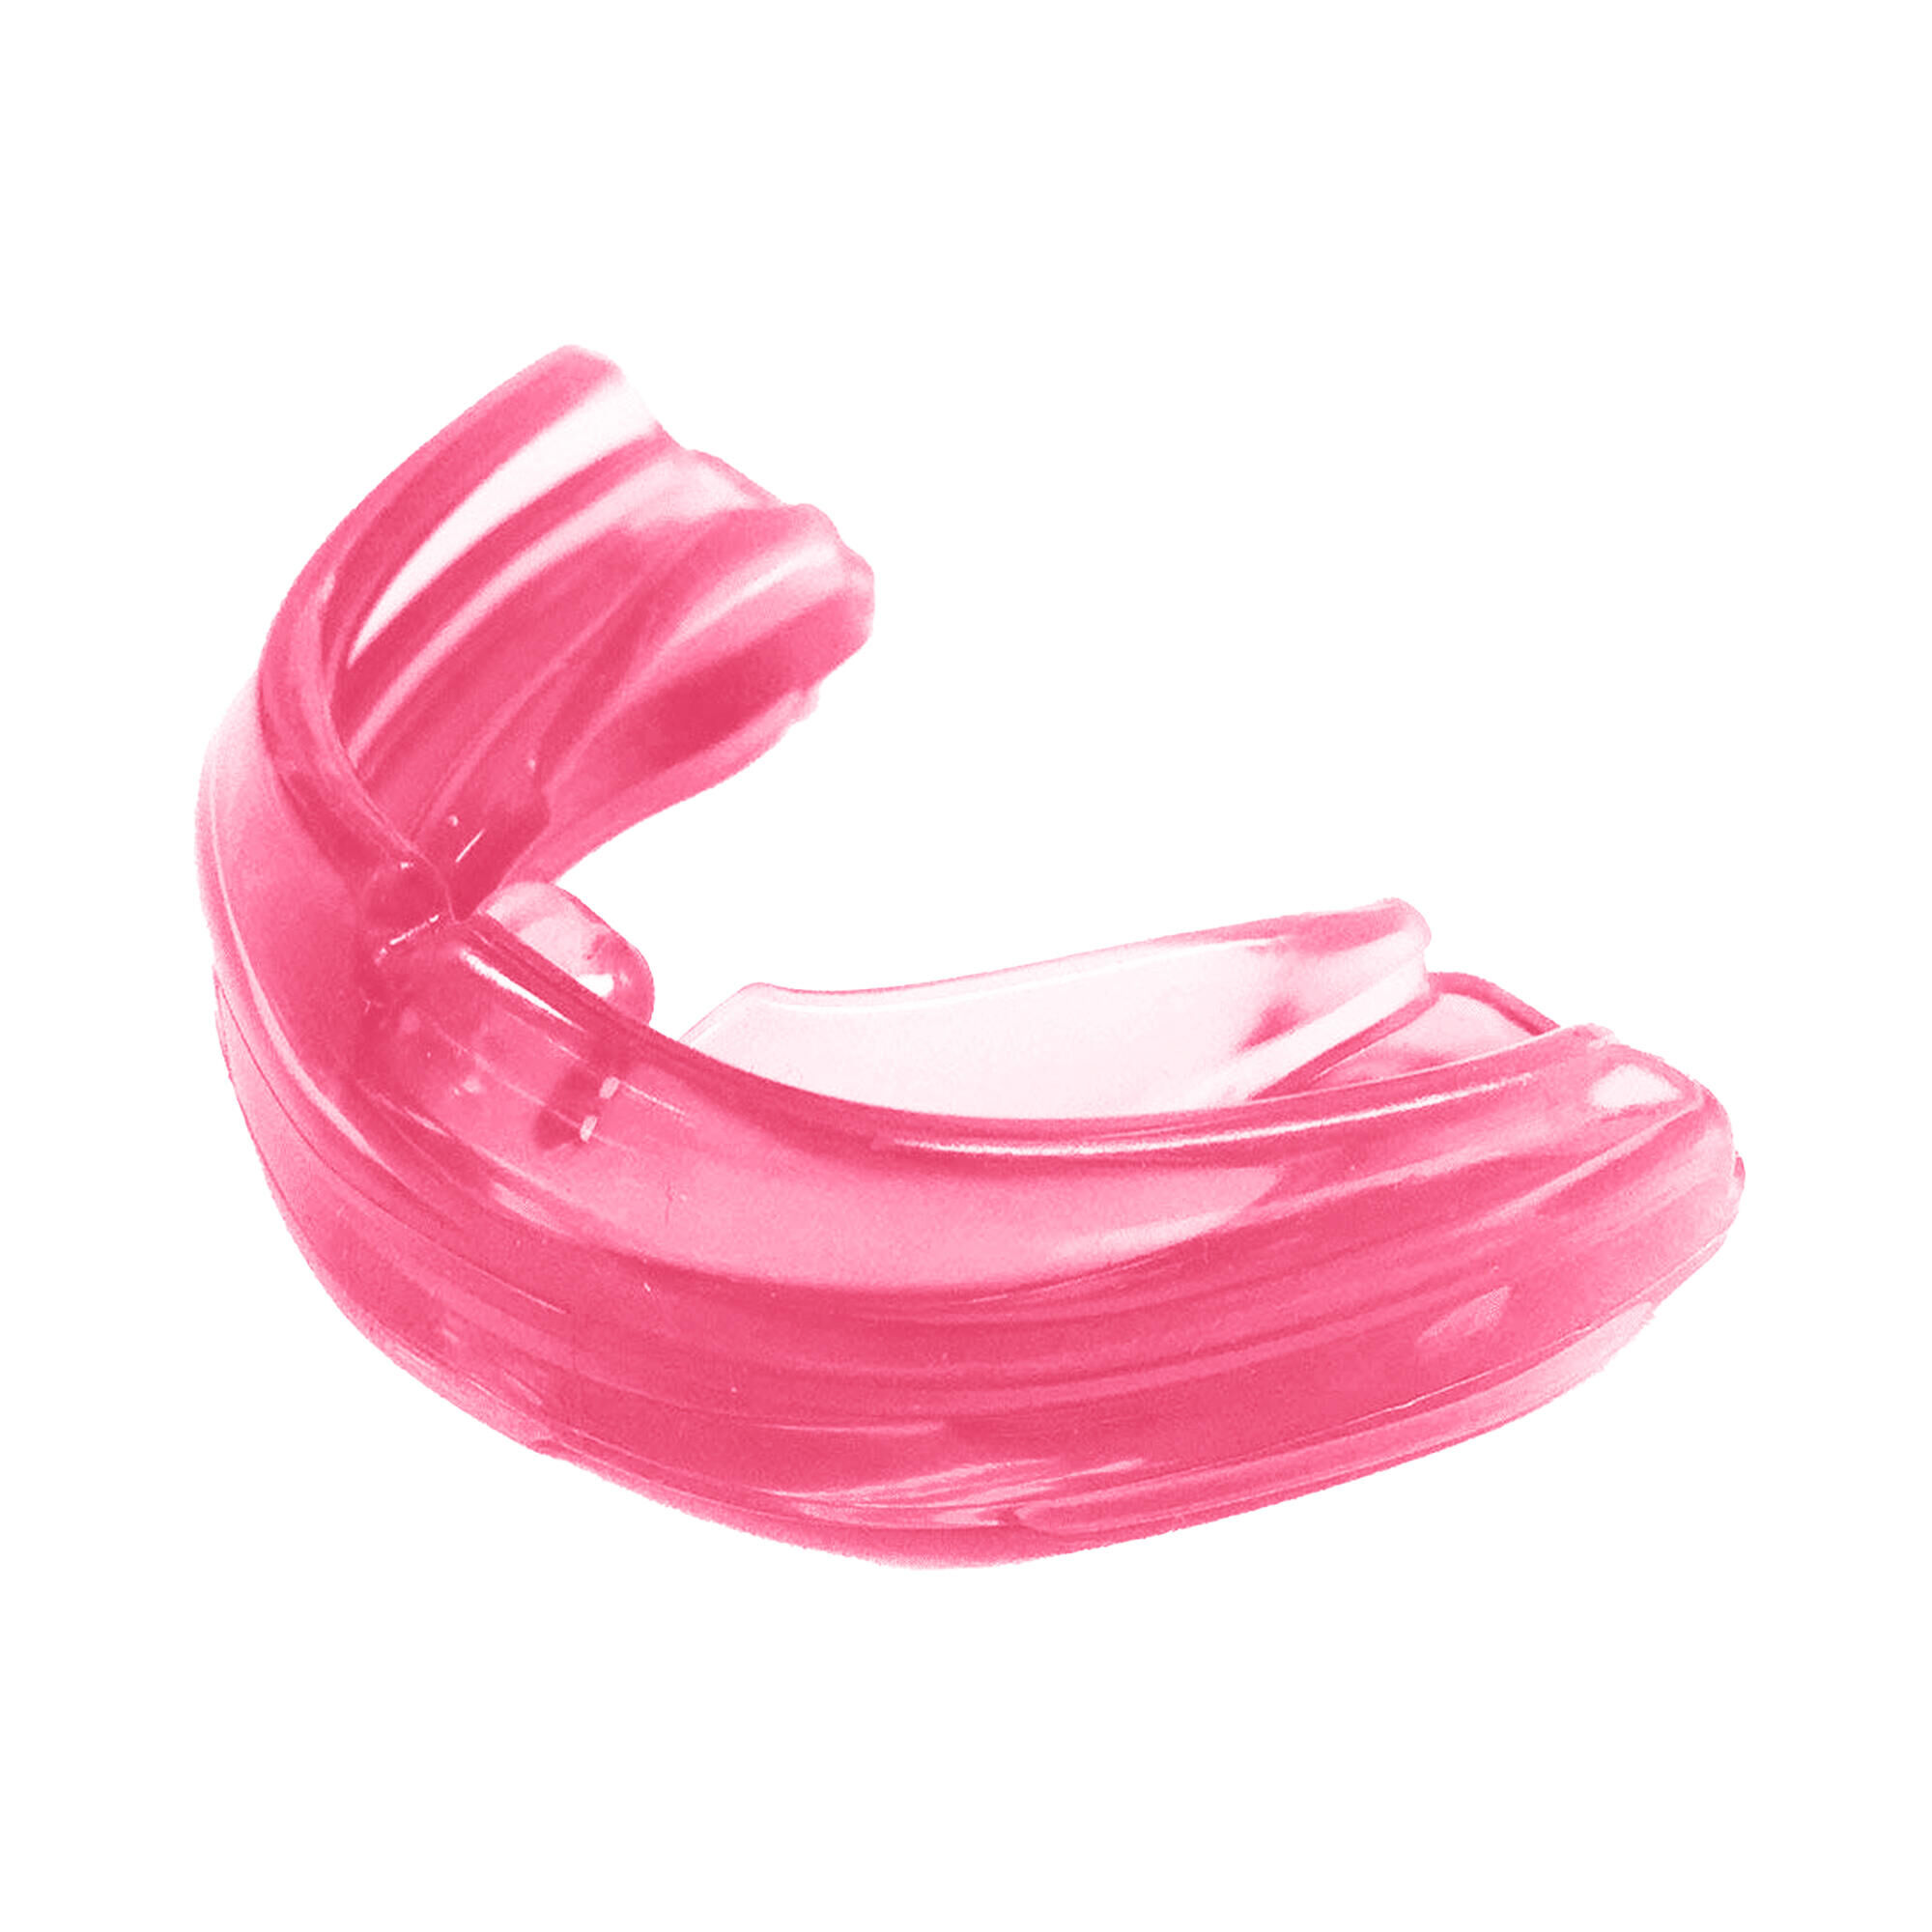 SHOCK DOCTOR Unisex Adult Mouthguard (Pink)